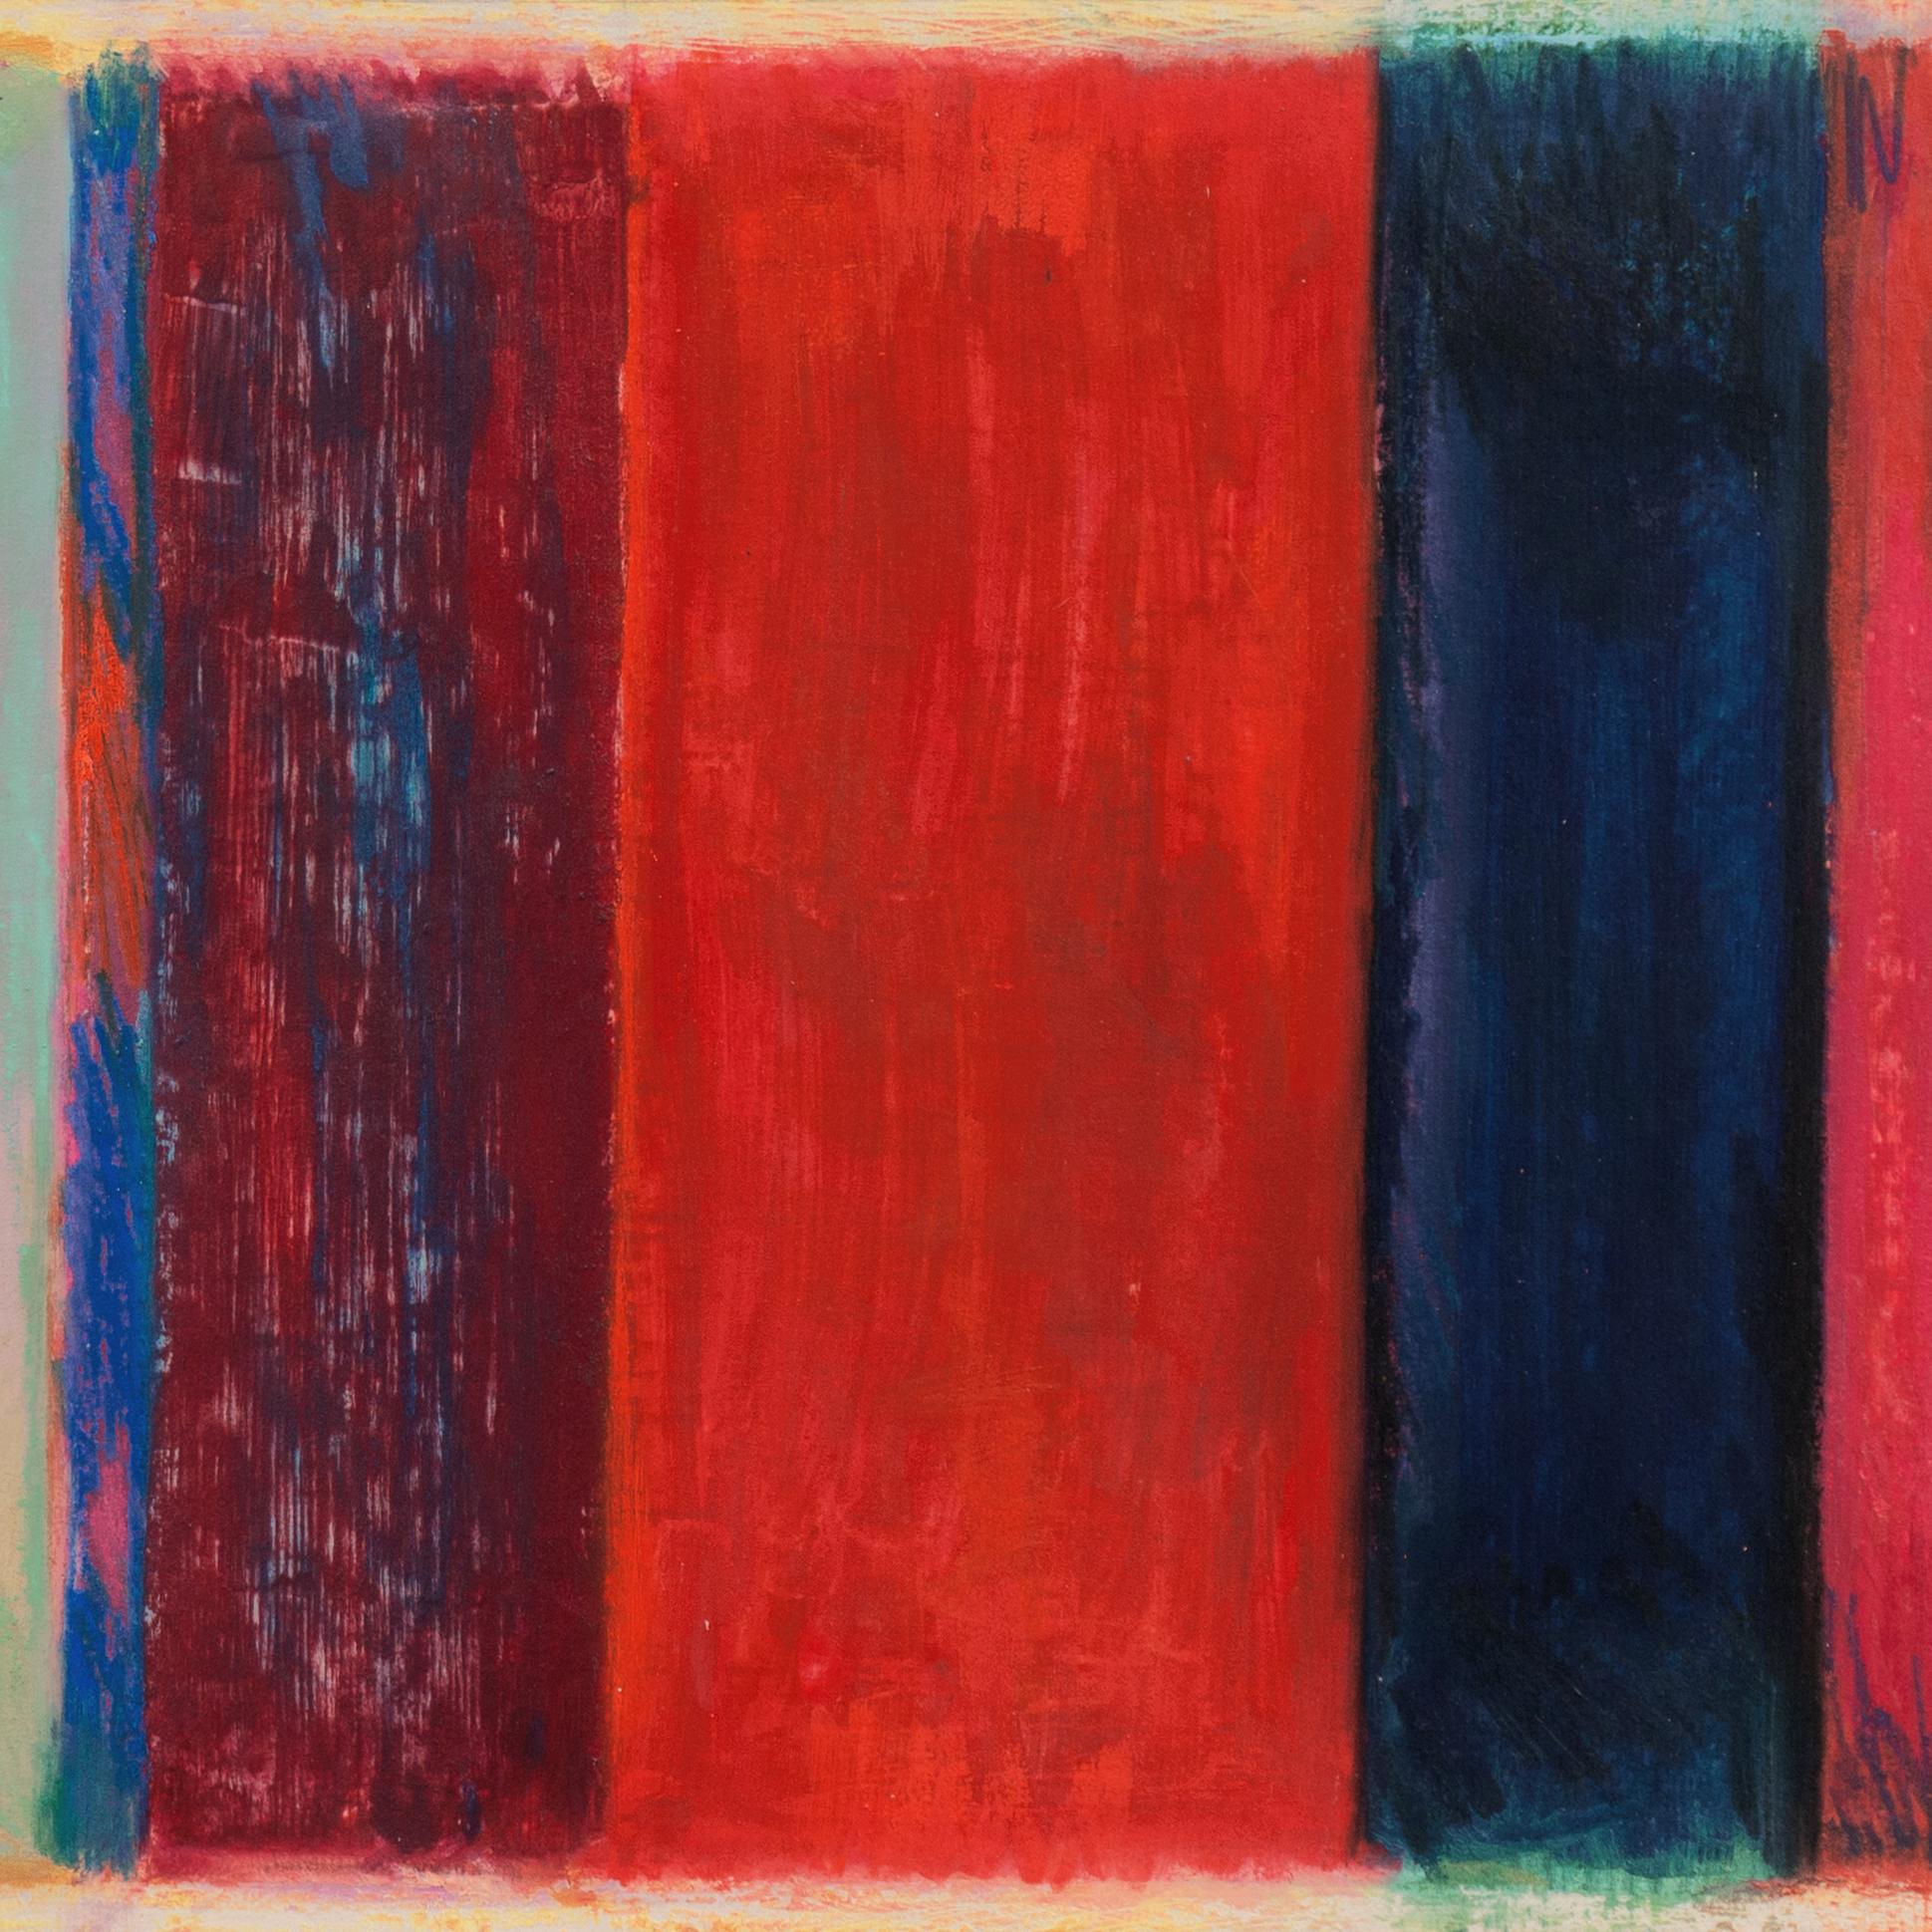 Signed lower left, 'Inman' for Robert Inman (American, 1927–2016) and dated, beneath the mat, 1981.
Matted dimensions: 20 x 30 inches.

Robert Inman first studied at Occidental College and, subsequently, at the Chouinard Art Institute. After